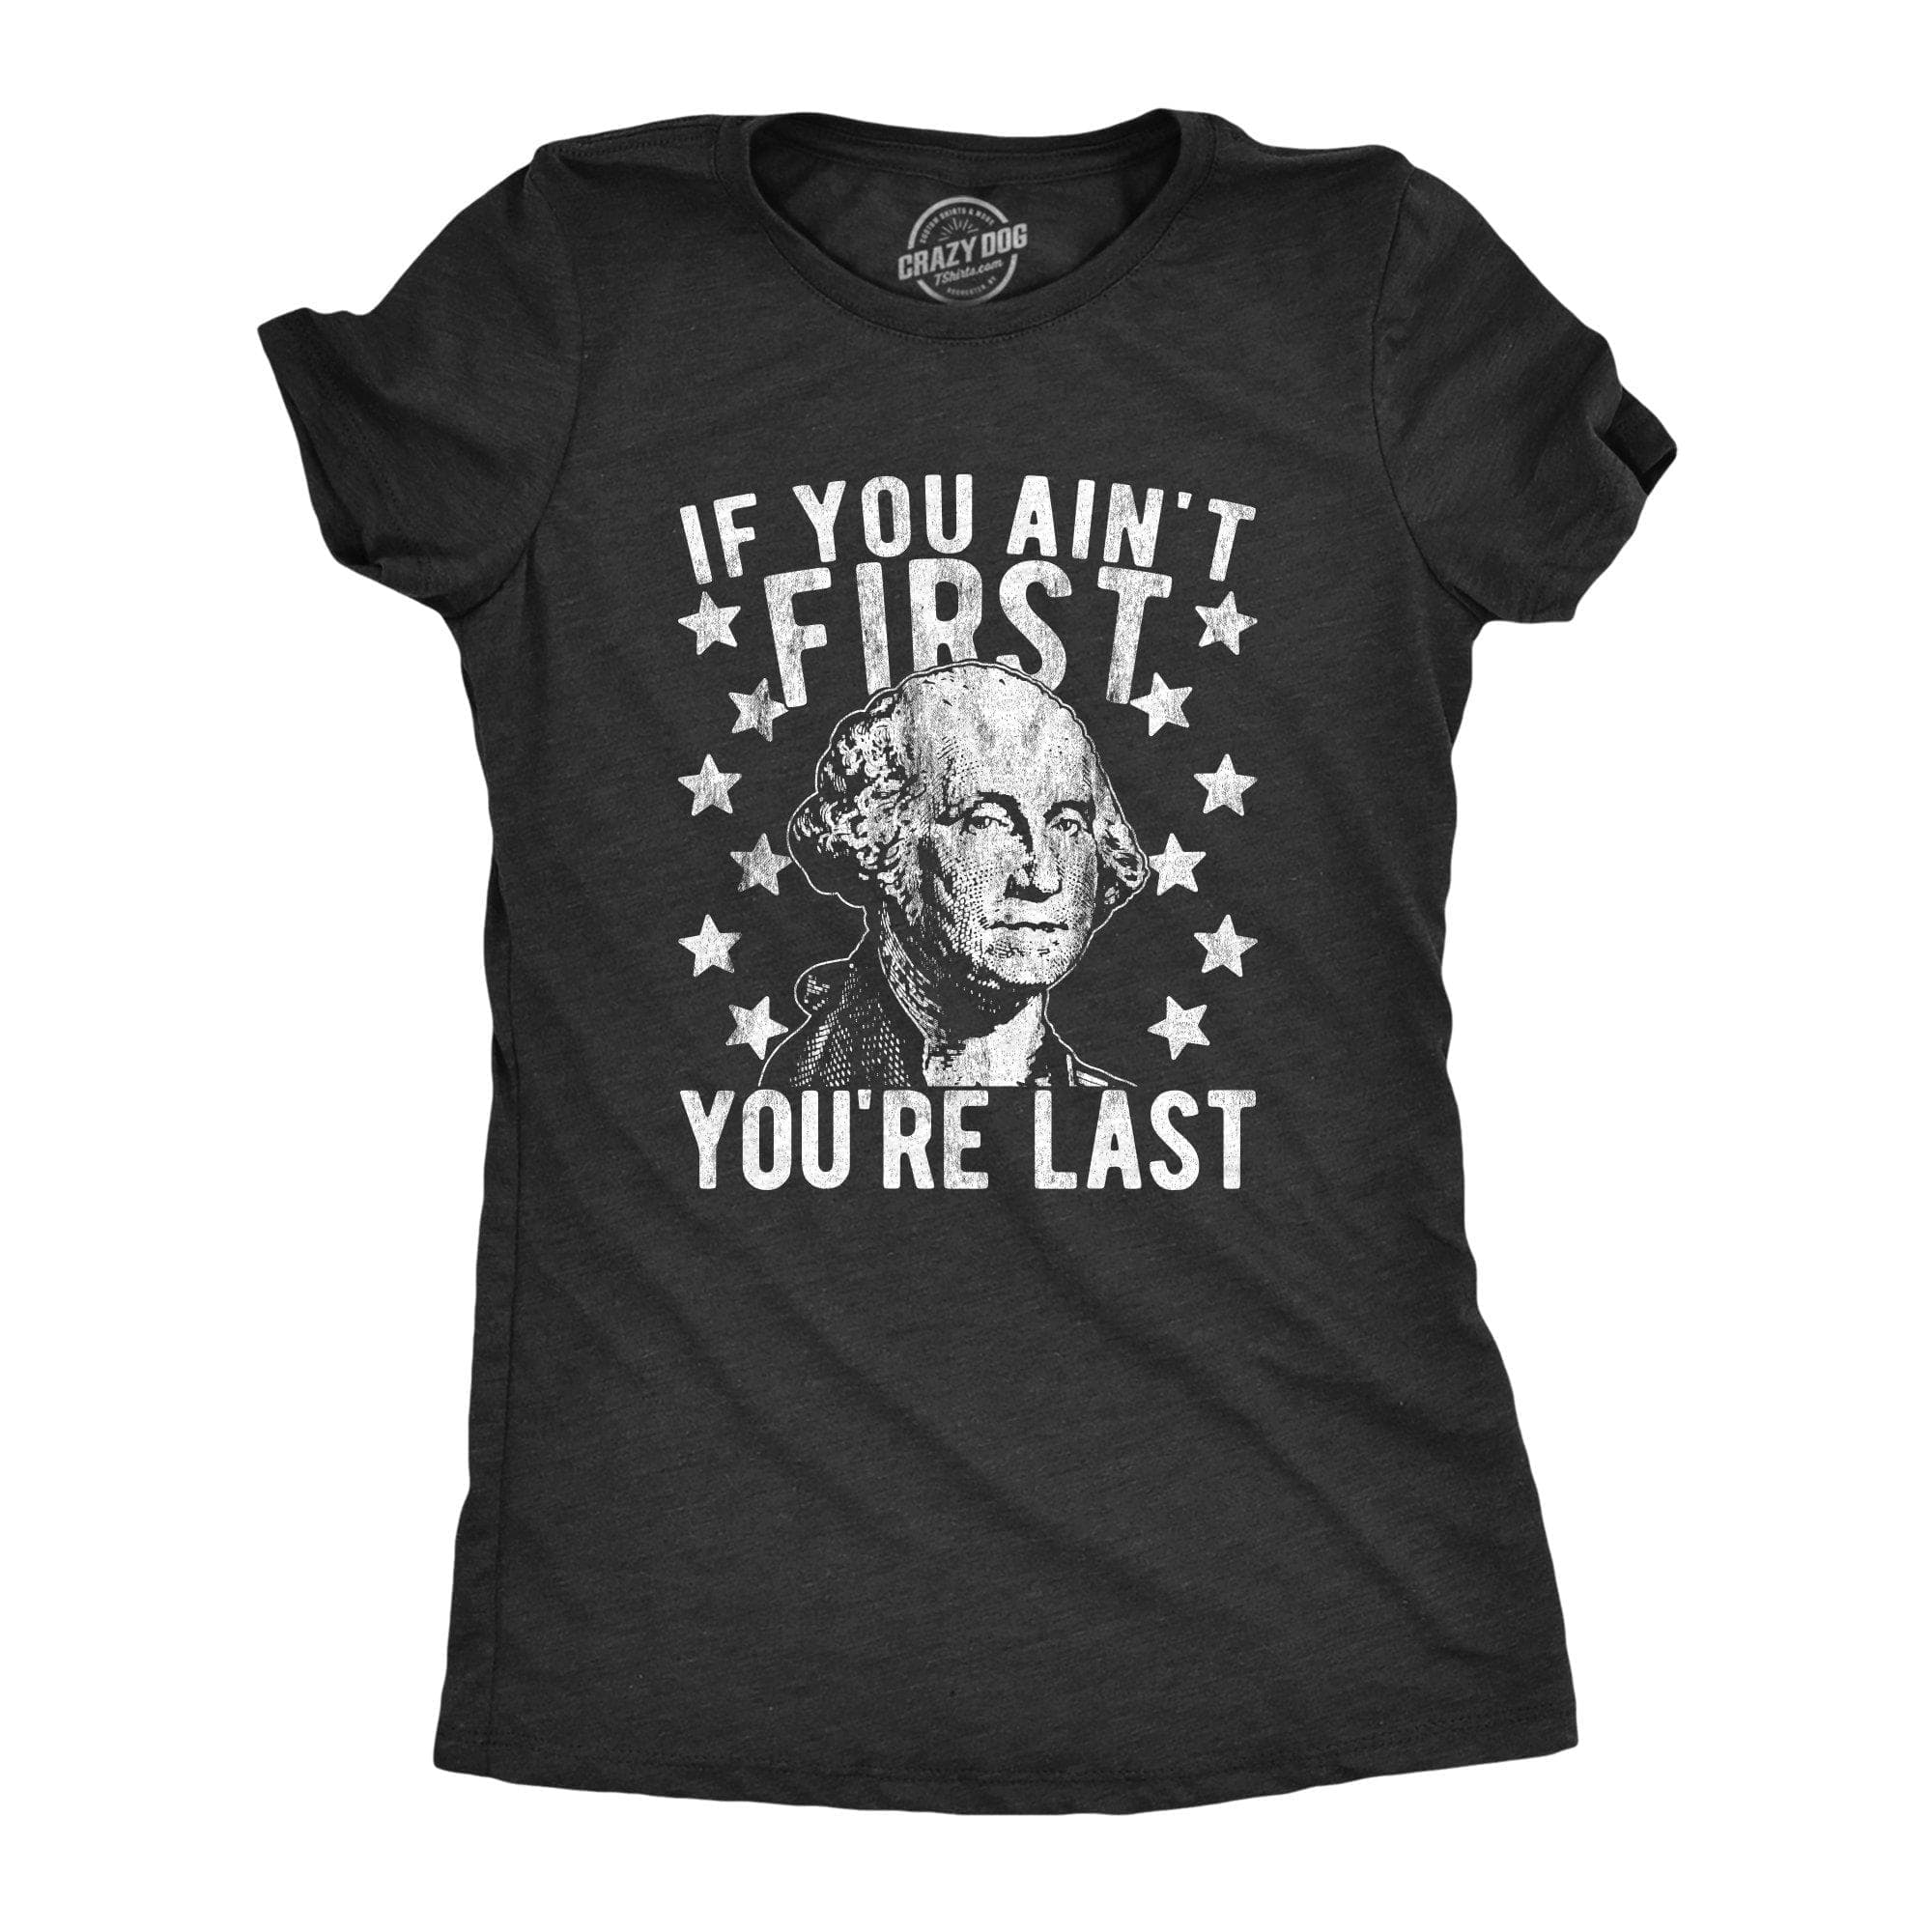 If You Ain't First You're Last Women's Tshirt - Crazy Dog T-Shirts